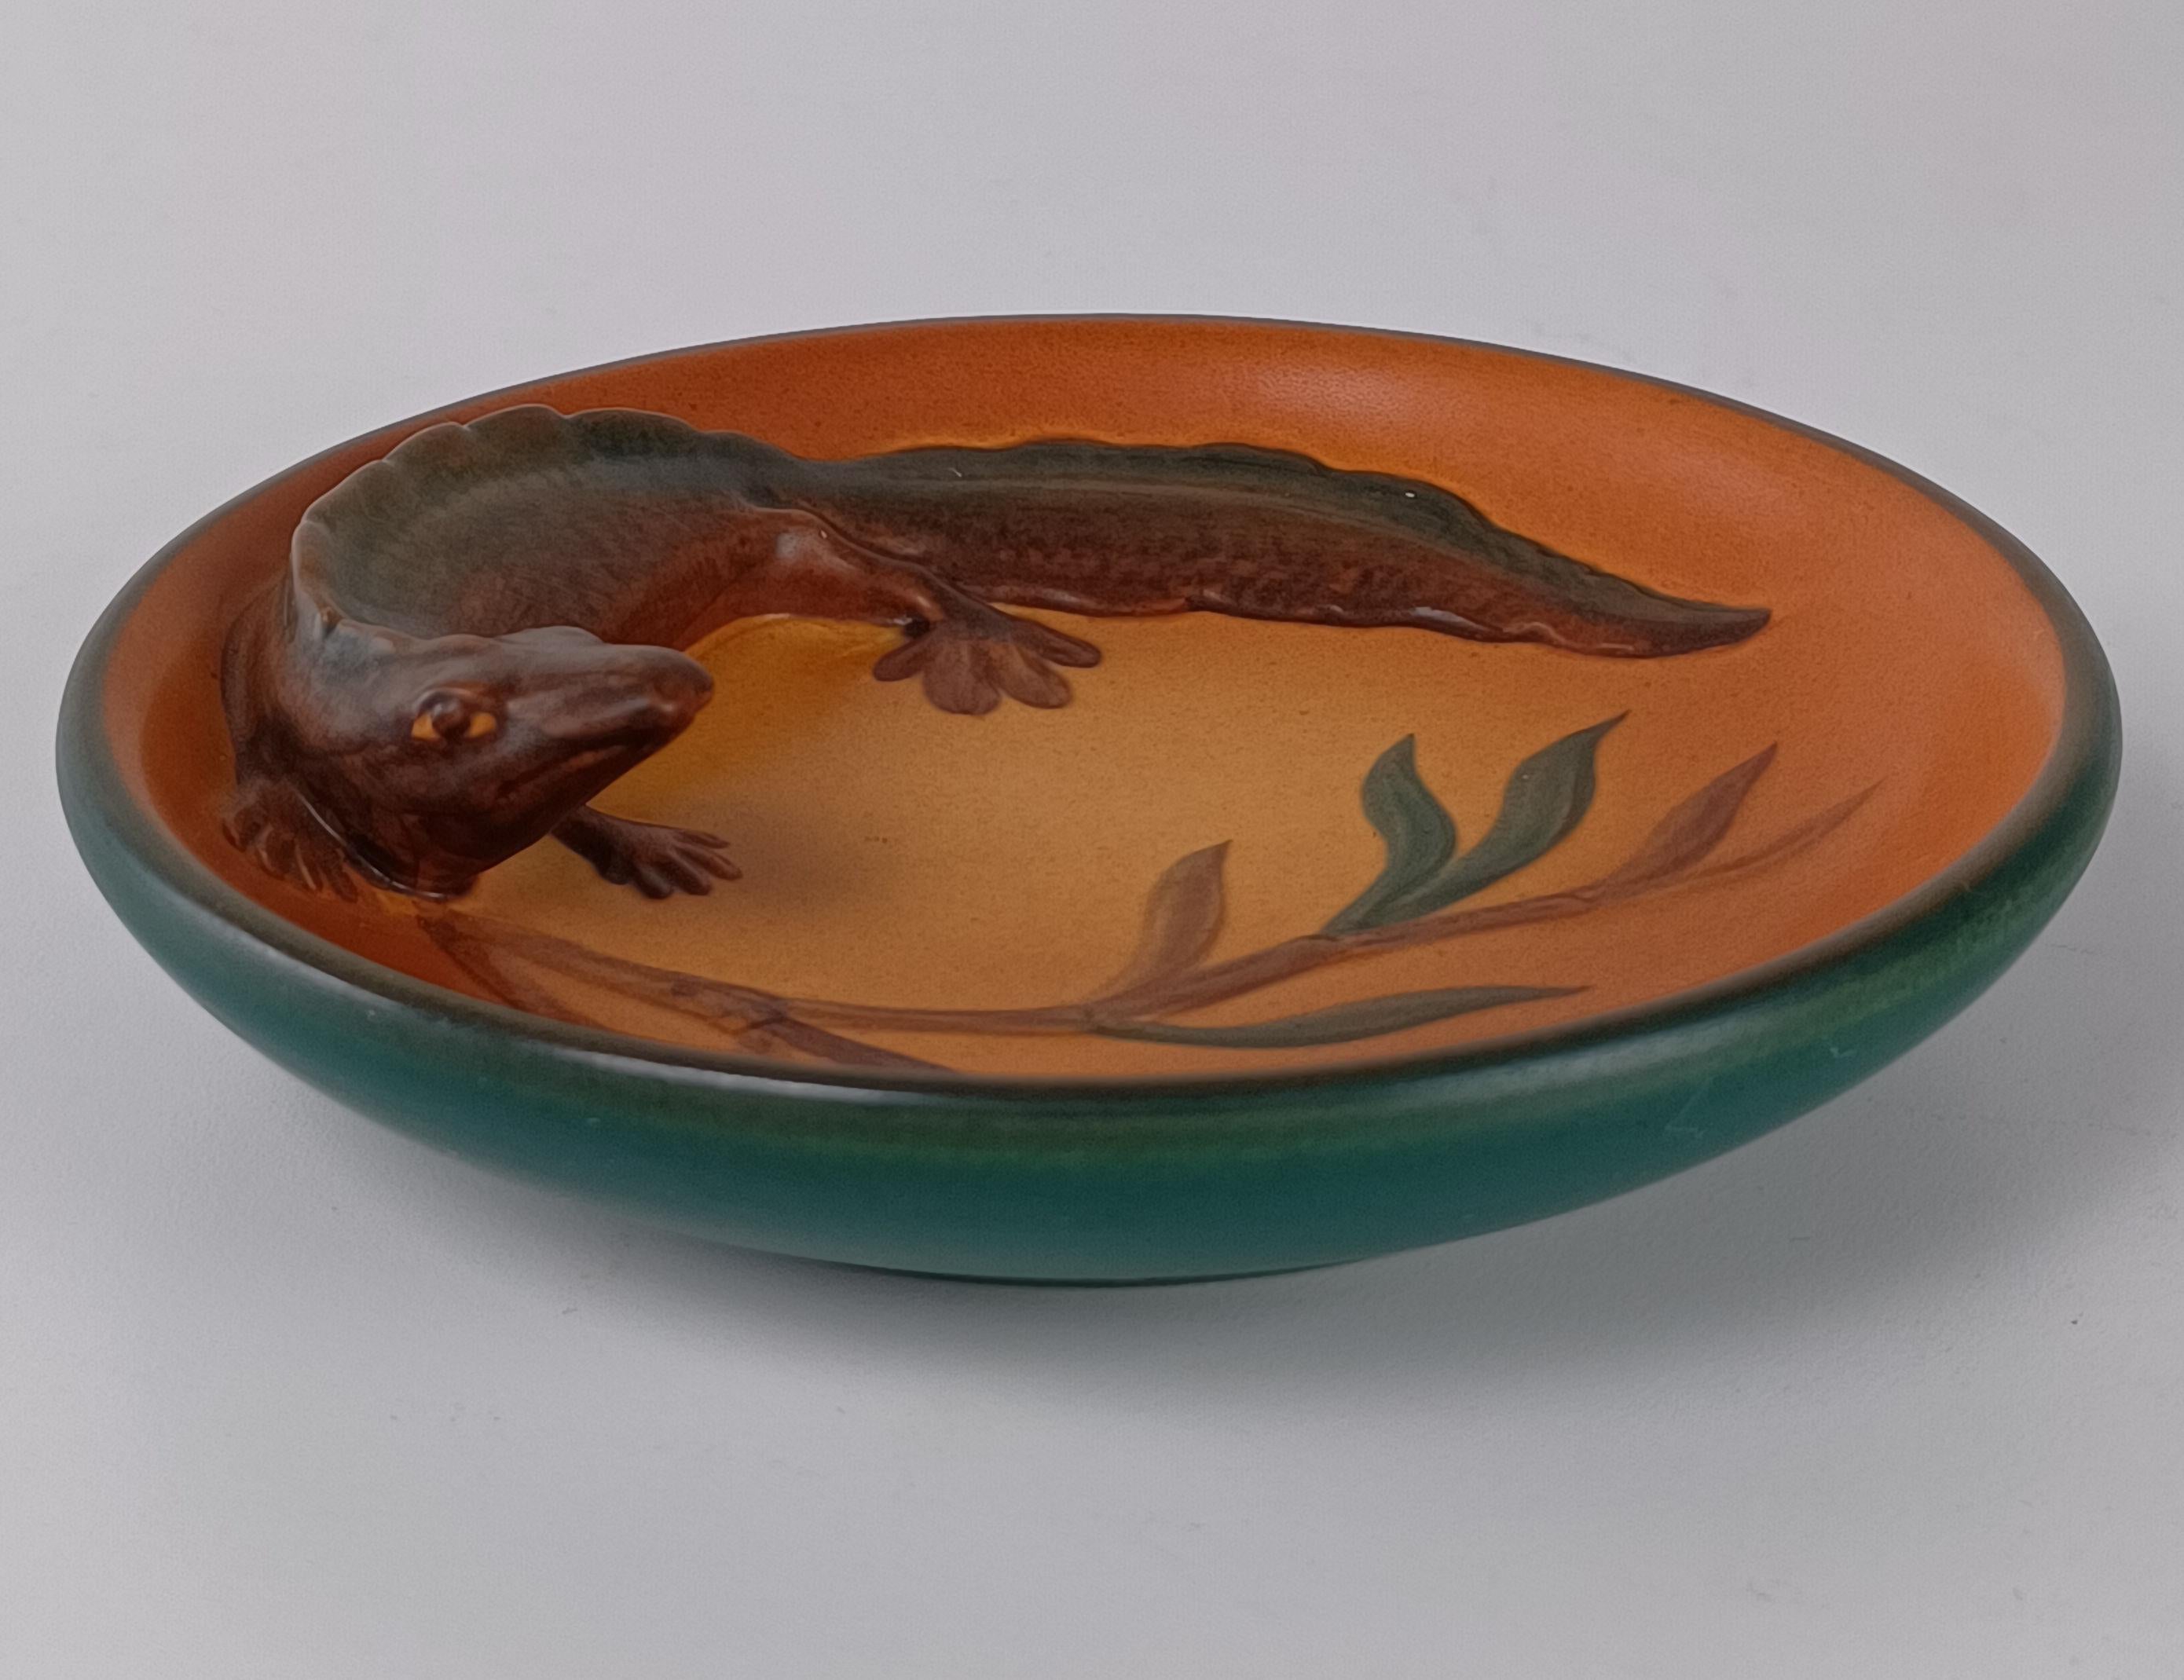 1920's Danish Art Nouveau Handcrafted Fish and Salamander Bowls by Ipsens Enke In Good Condition For Sale In Knebel, DK